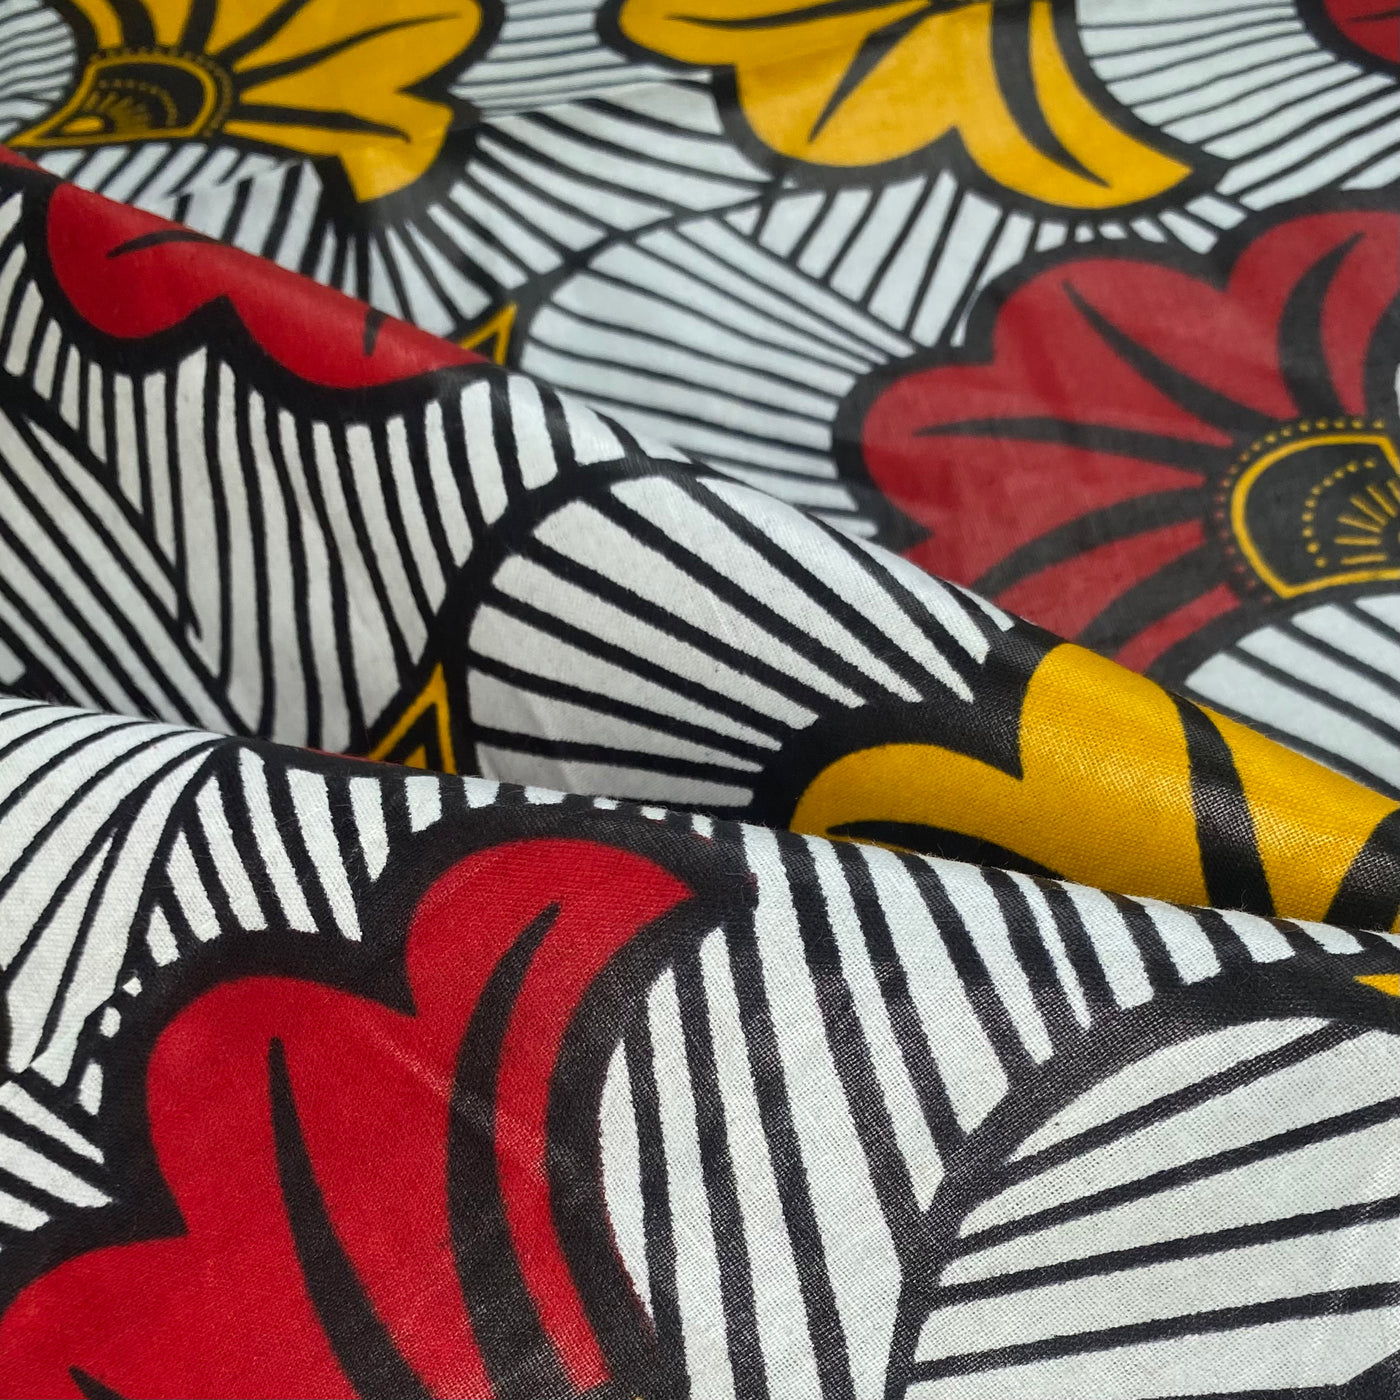 Waxed African Printed Cotton - Floral - Multi-Colour / Yellow / Red